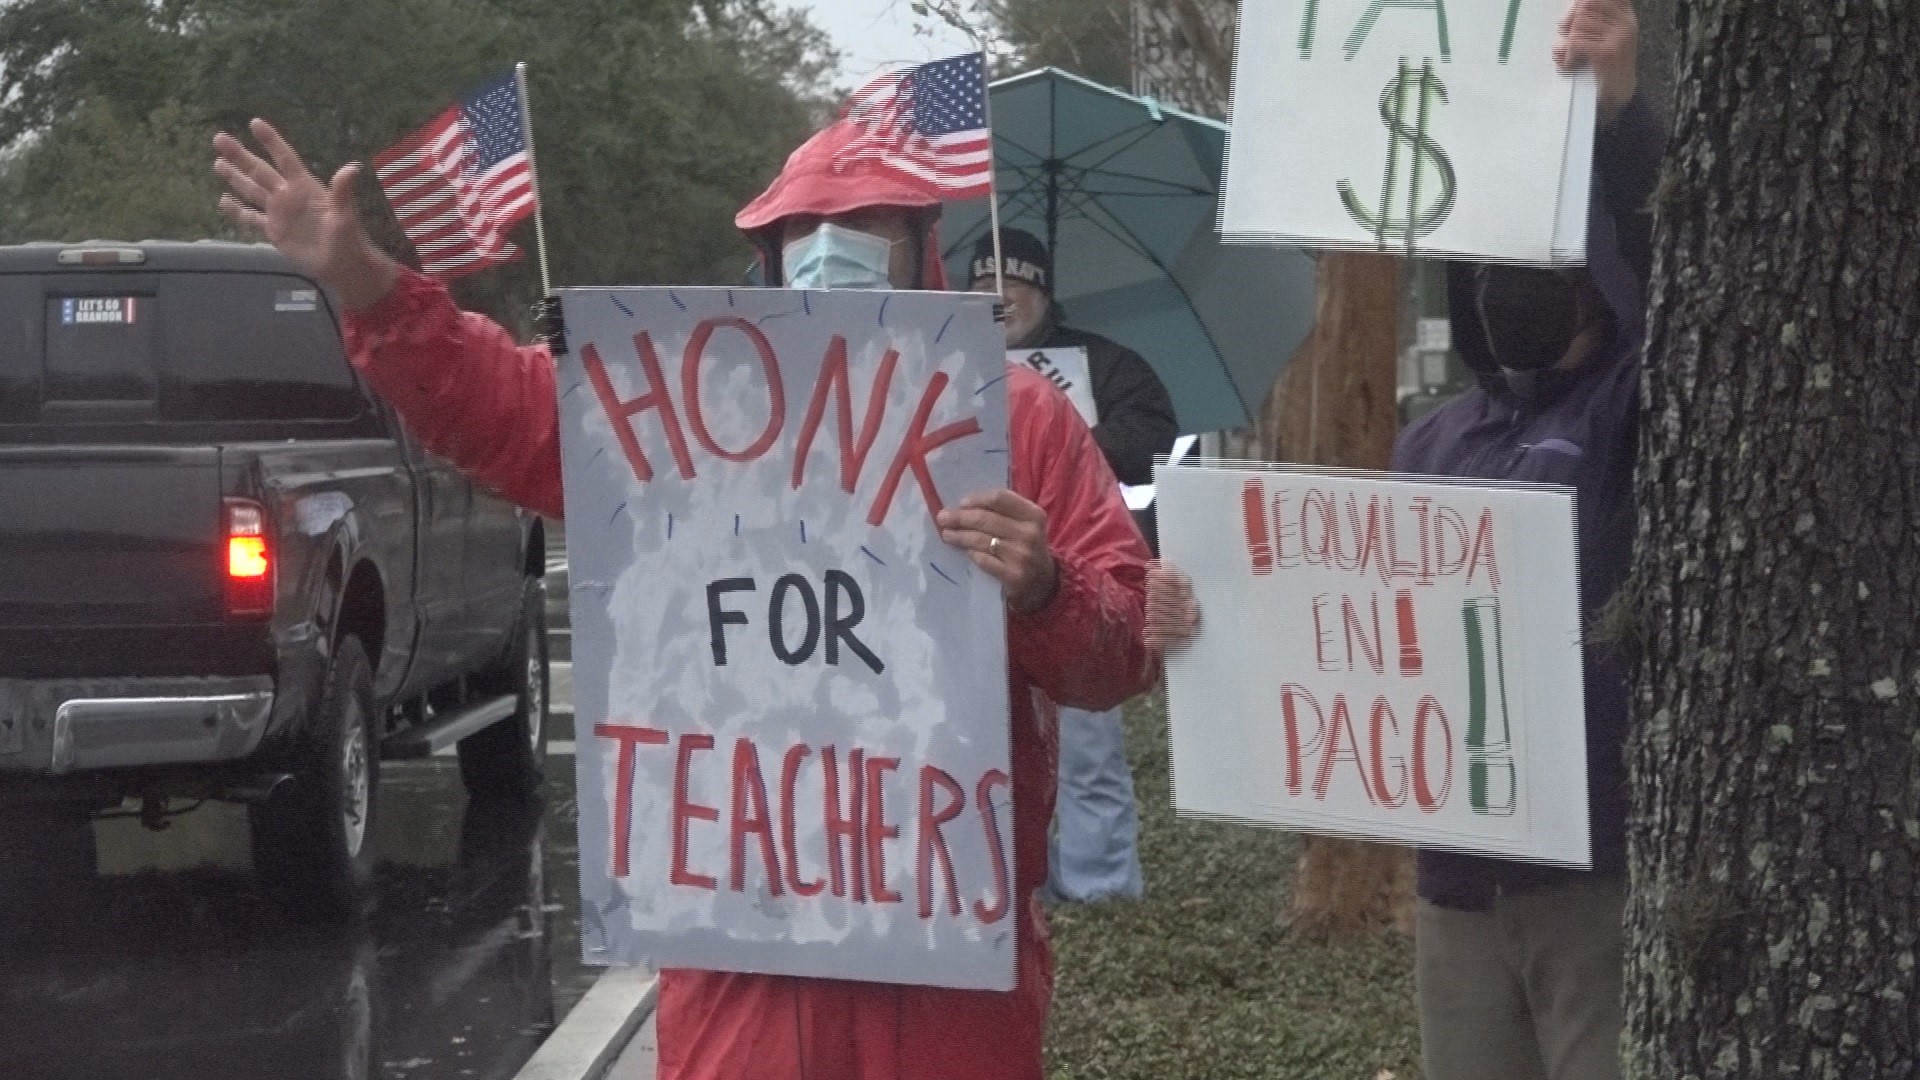 The rally called on local legislators to vote 'no' on two bills that opponents say are anti-union and don't adequately support veteran educators.